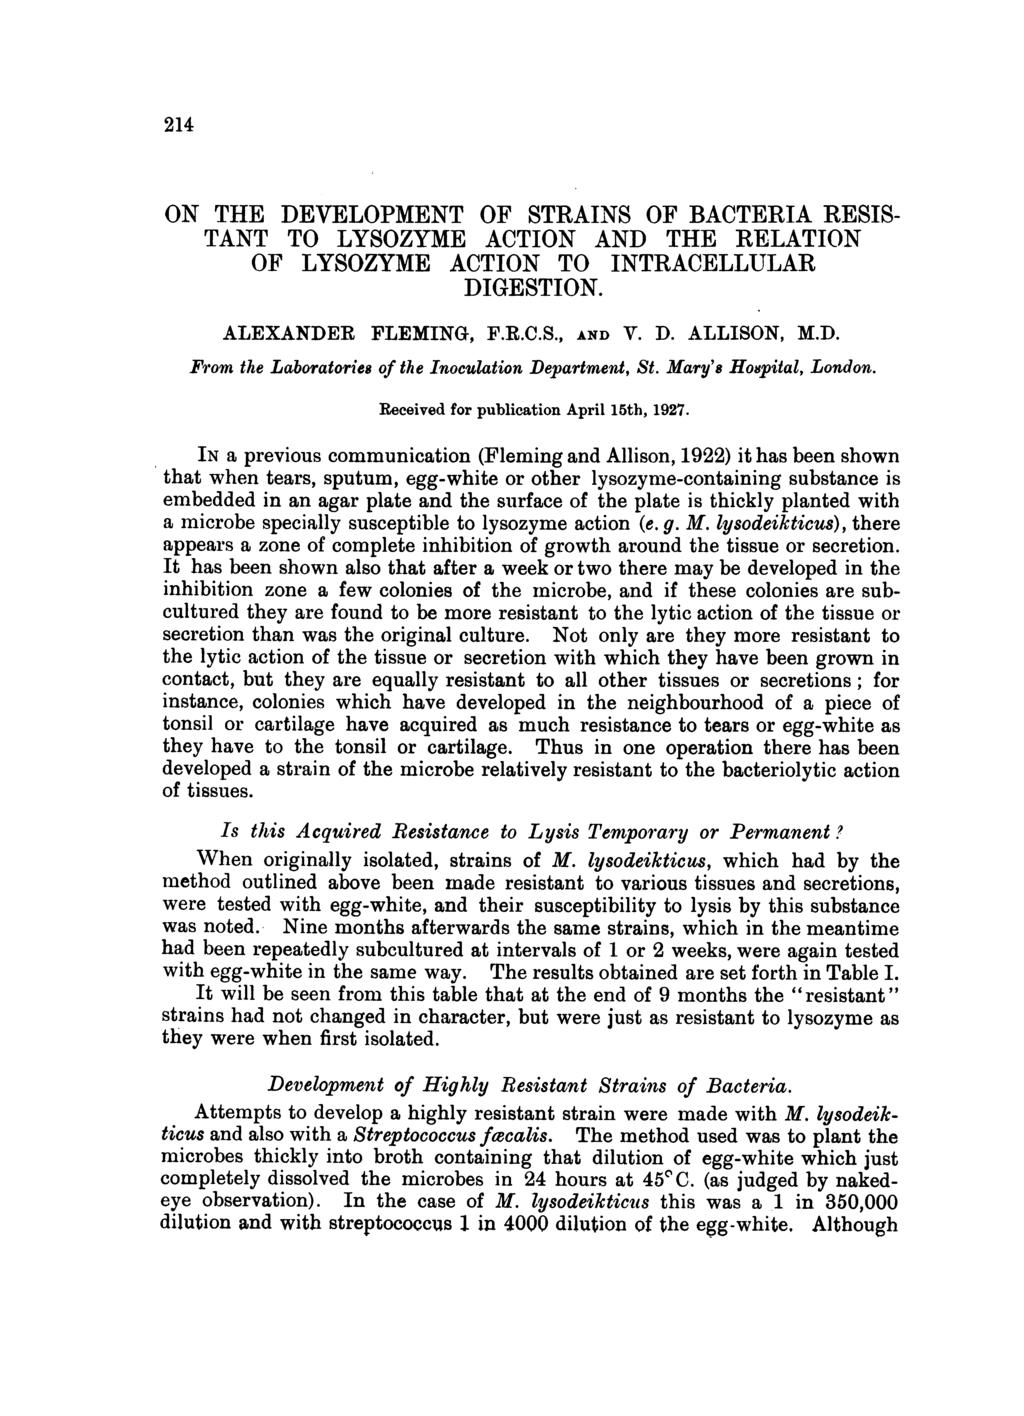 214 ON THE DEVELOPMENT OF STRAINS OF BACTERIA RESIS- TANT TO LYSOZYME ACTION AND THE RELATION OF LYSOZYME ACTION TO INTRACELLULAR DIGESTION. ALEXANDER FLEMING, F.R.C.S., AND V. D. ALLISON, M.D. From the Laboratories of the Inoculation Department, St.